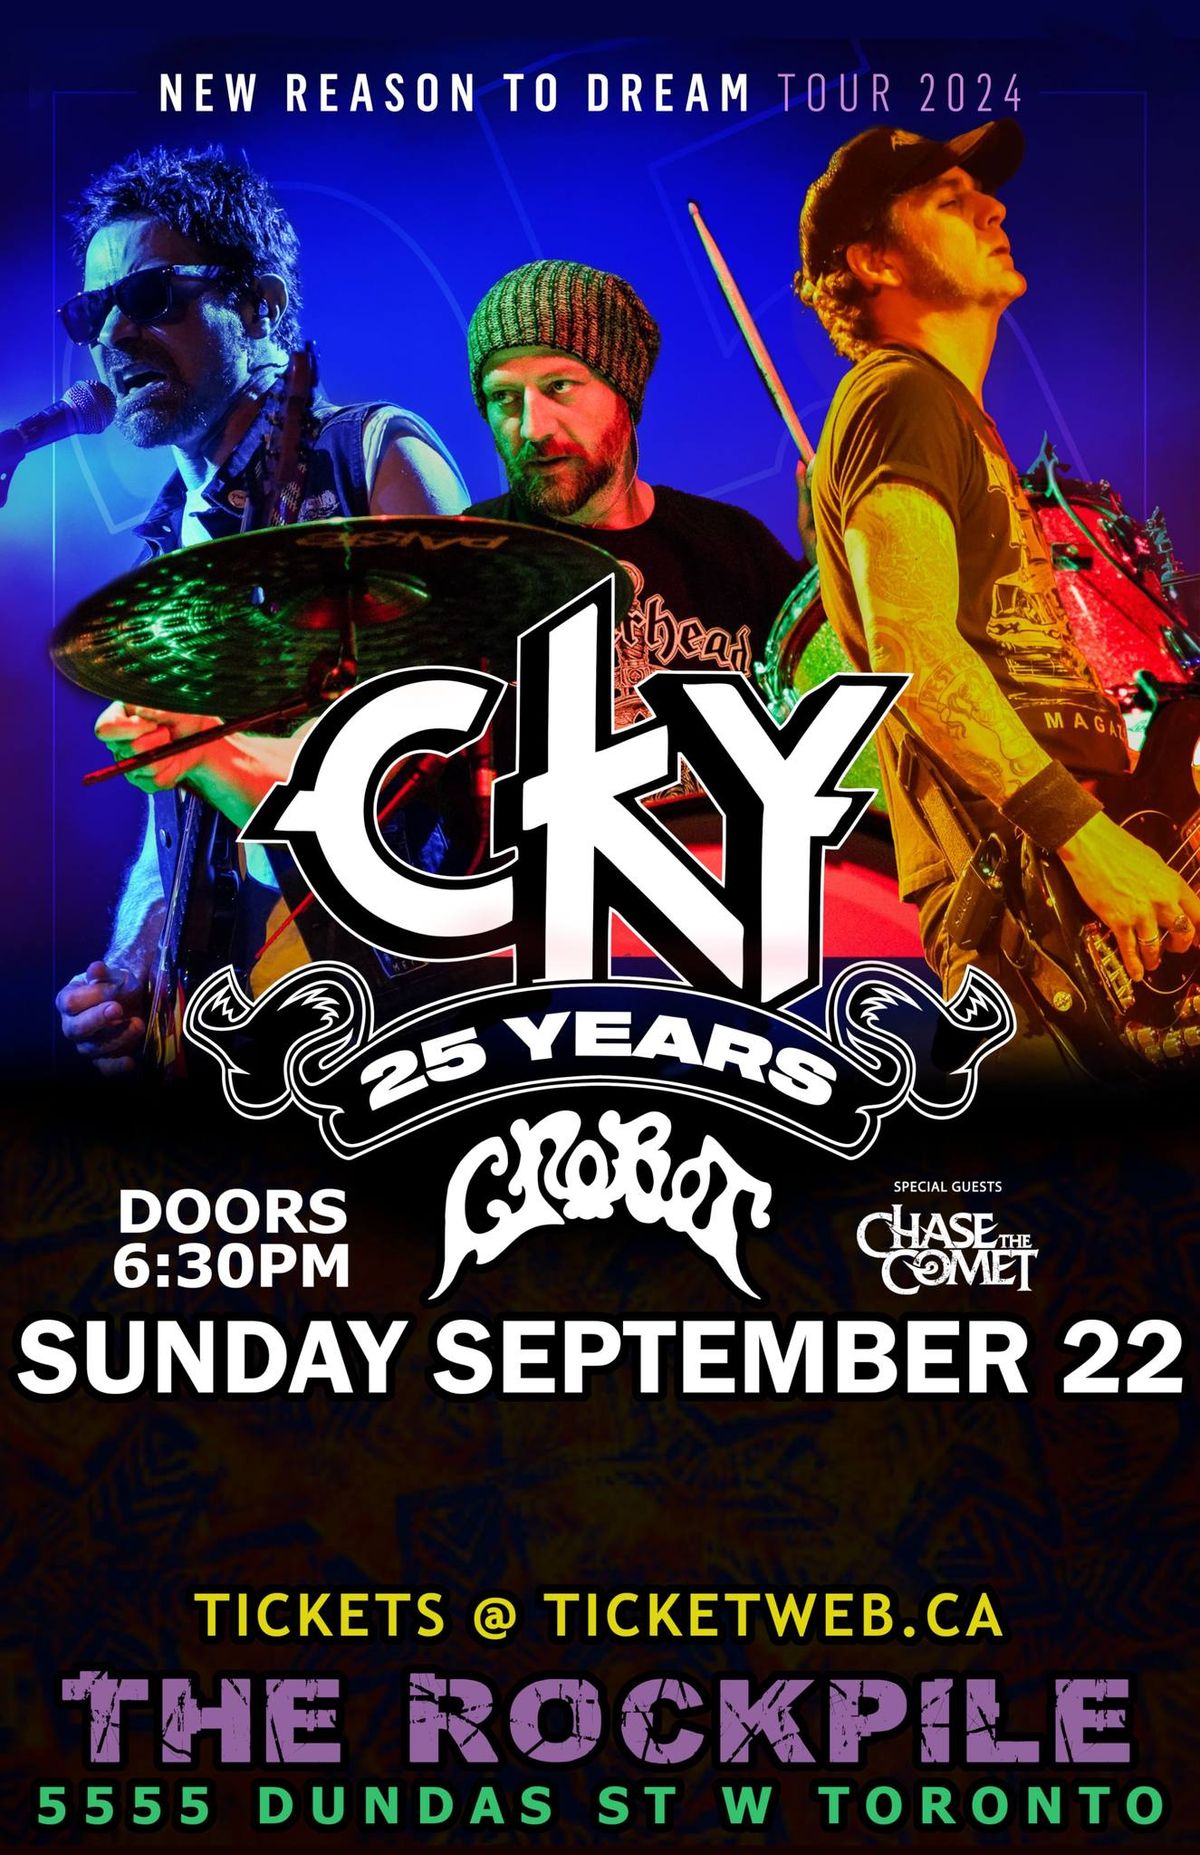 CKY with guests Crobot , Chase The Comet